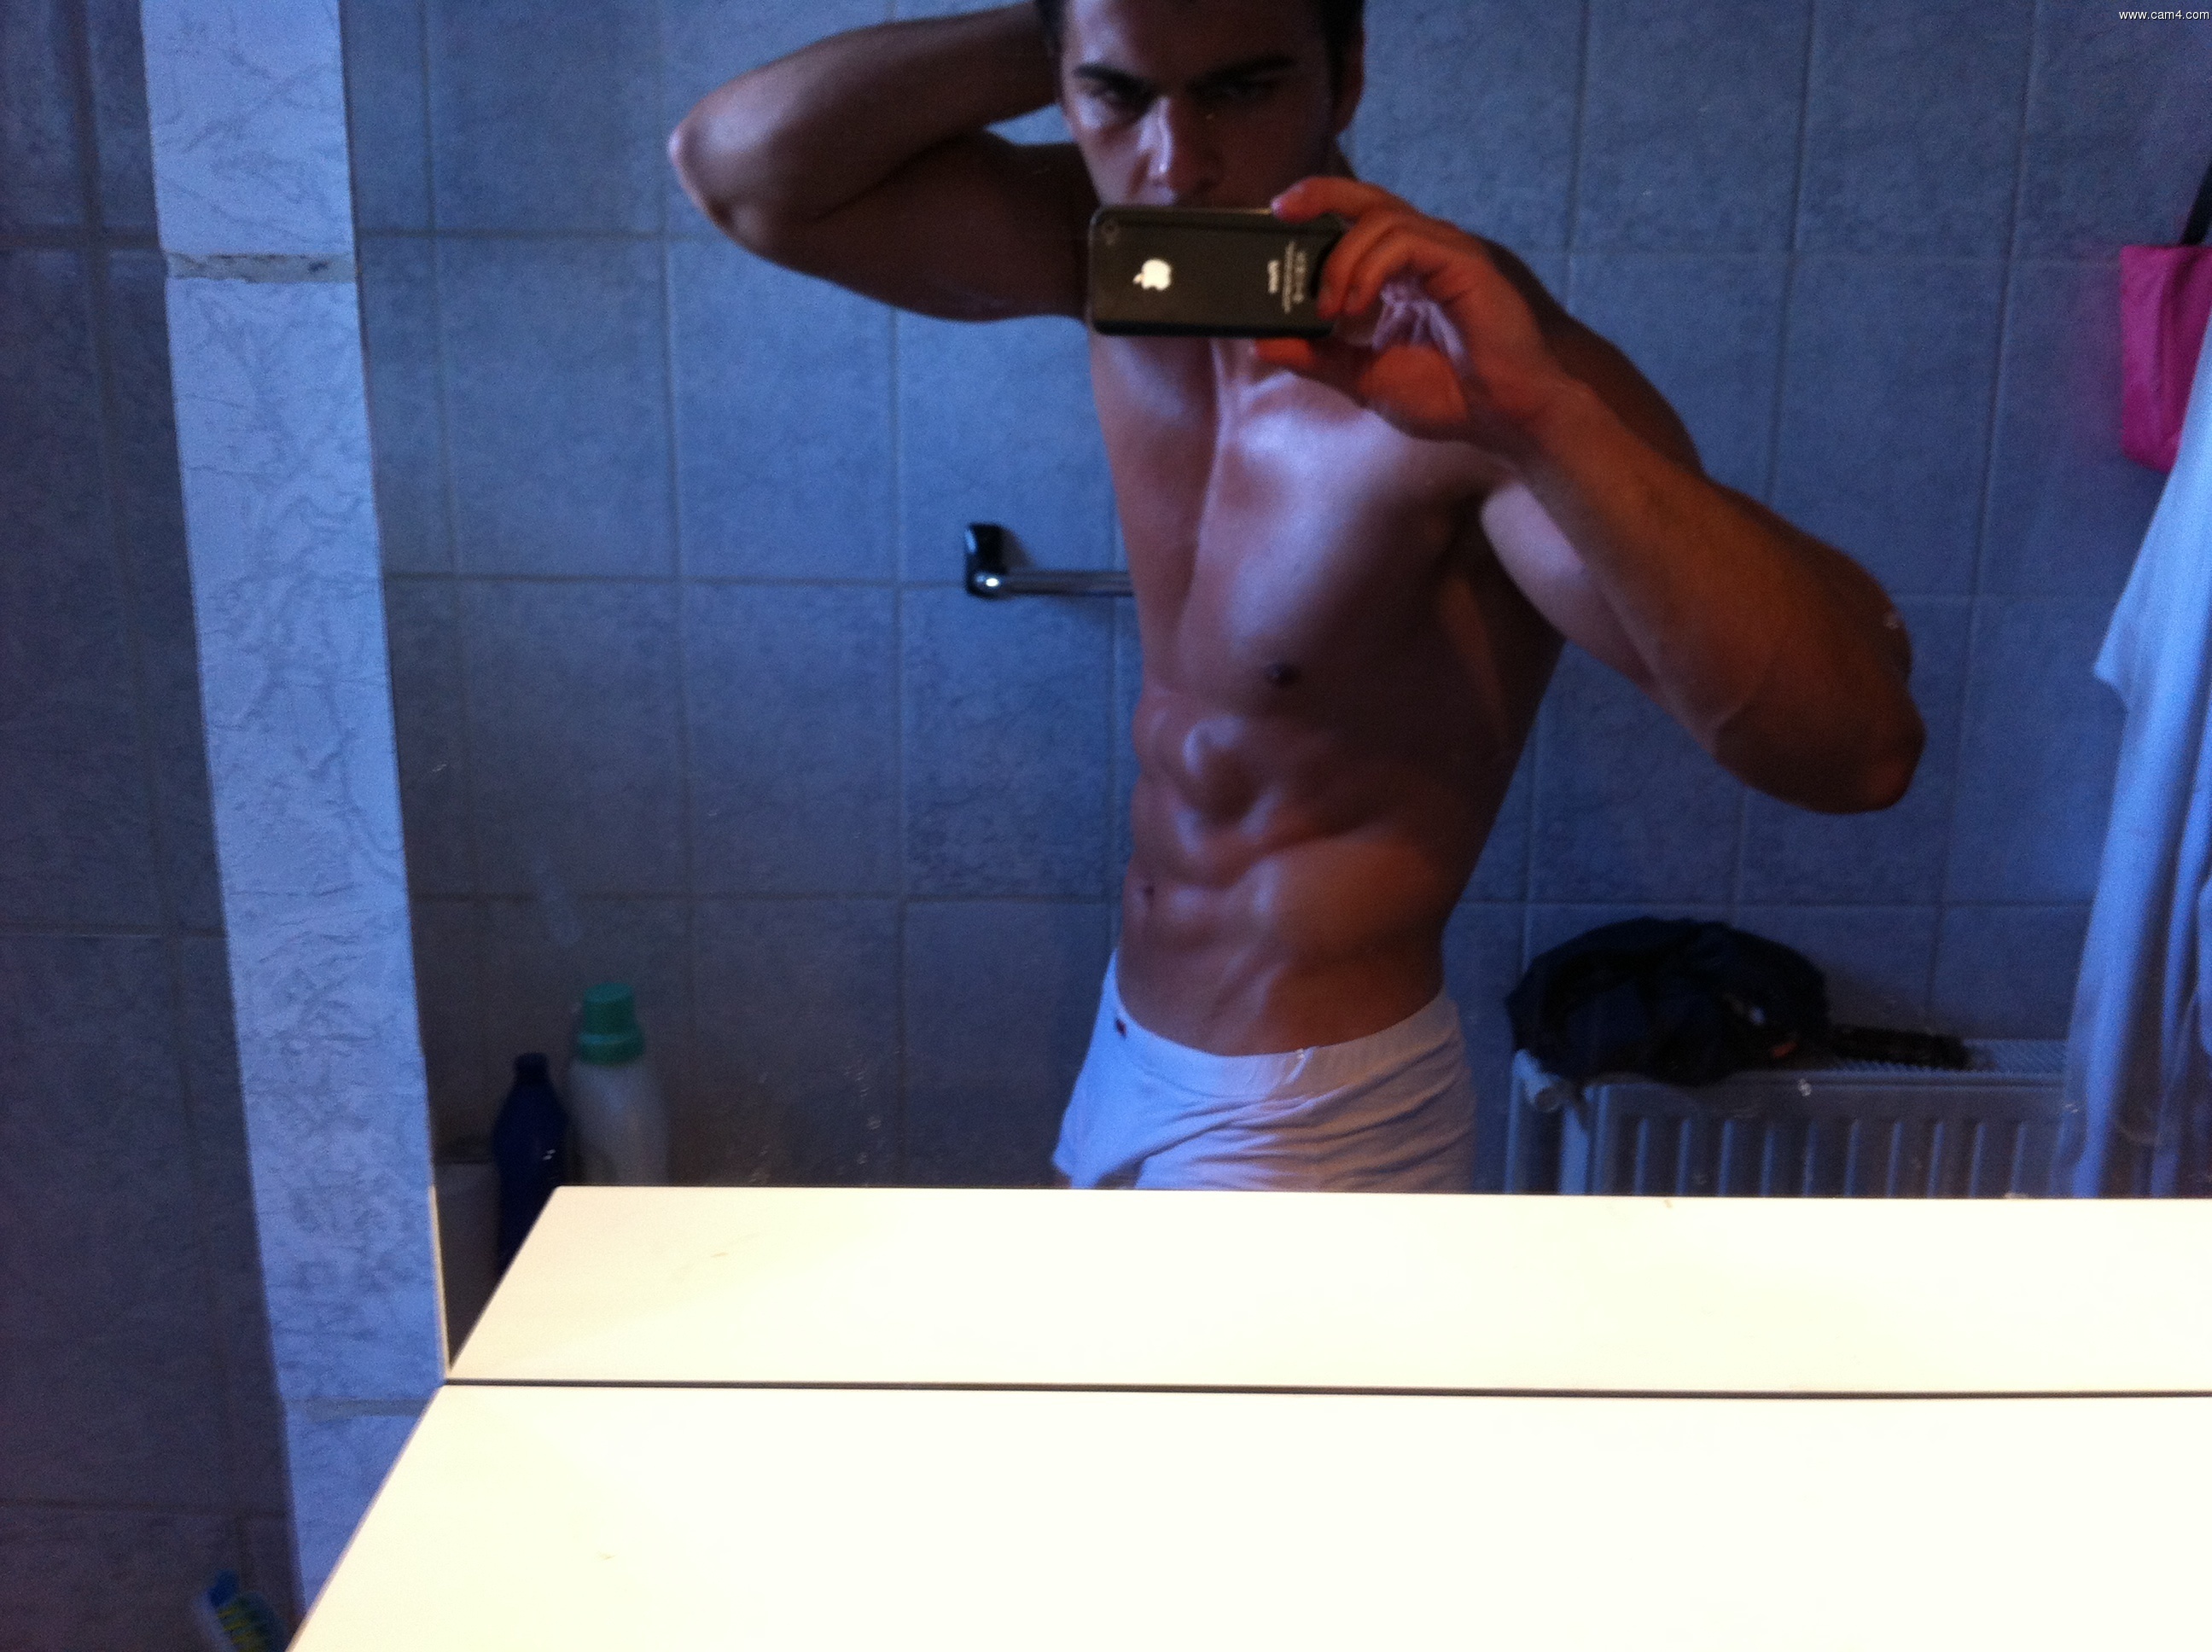 Italy cam4 male